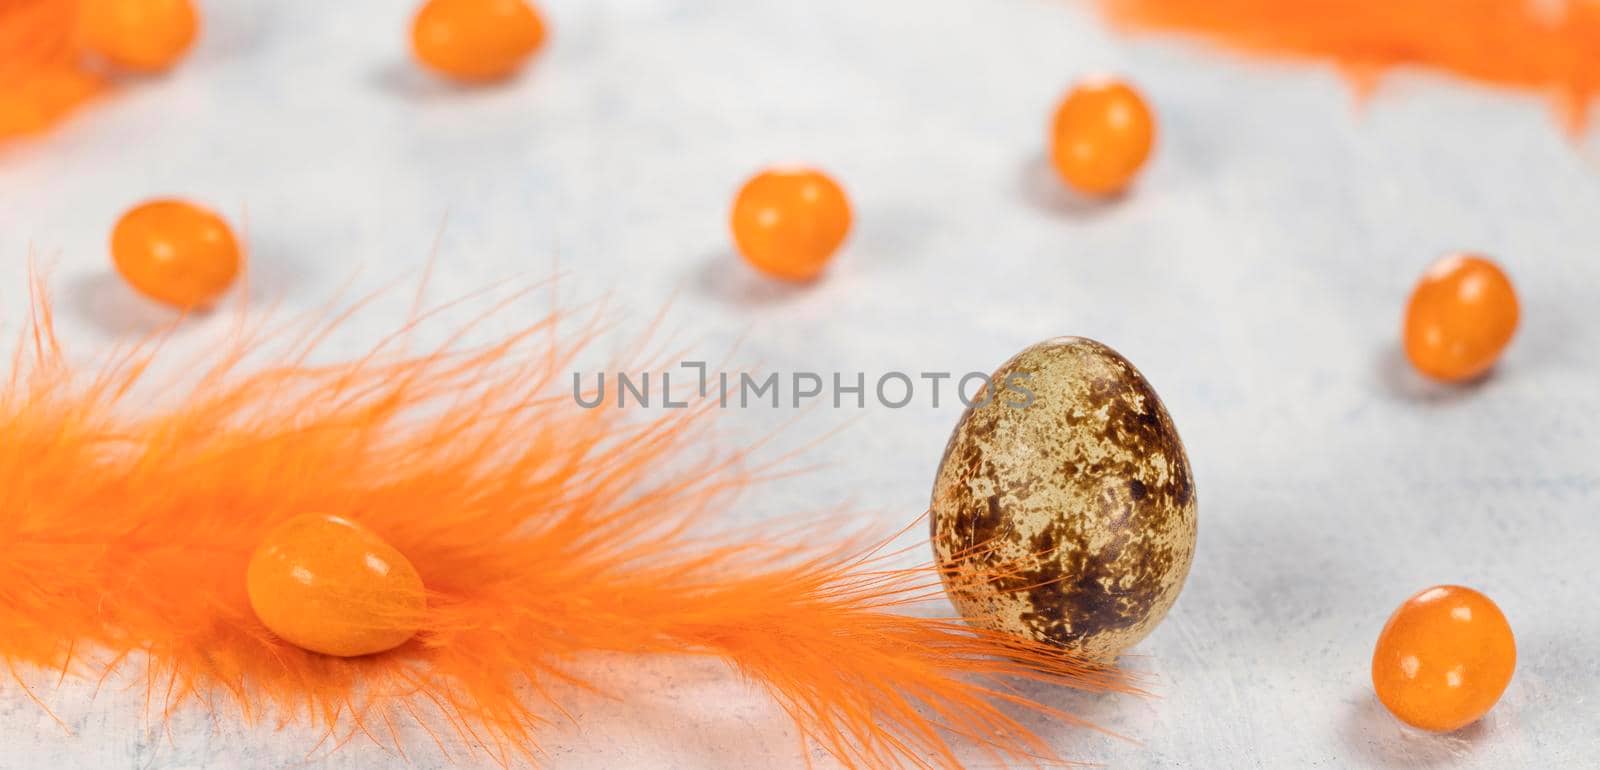 banner with quail egg on a white concrete background with orange feathers and orange chocolates in the shape of an egg. Happy Easter concept. Soft focus